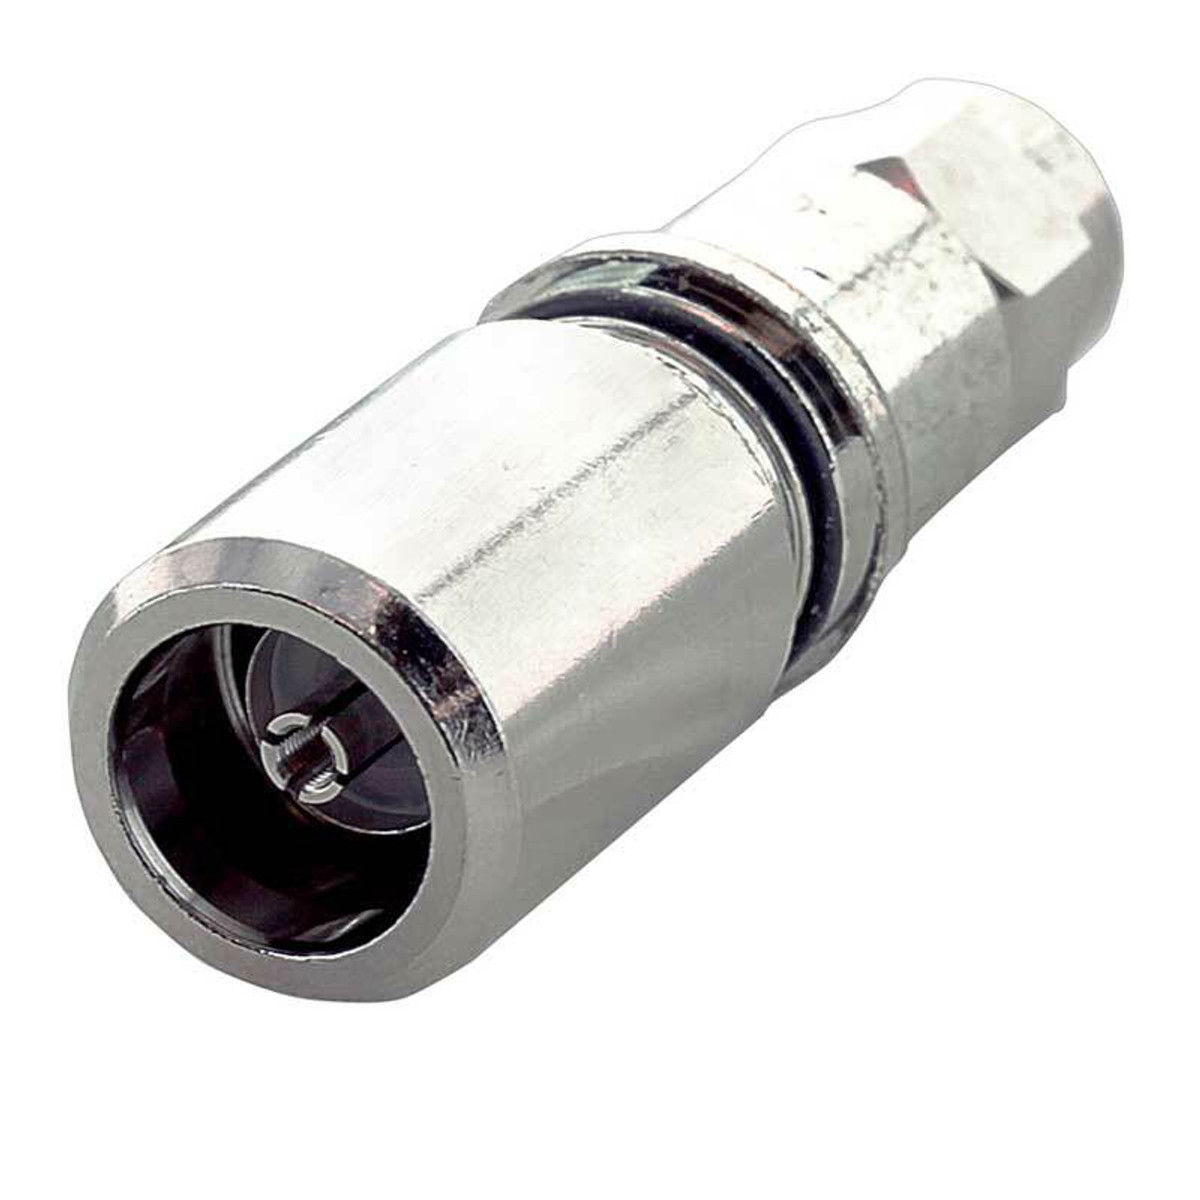 weBoost (Wilson) 971150 F-Male Connector for RG11 Cable